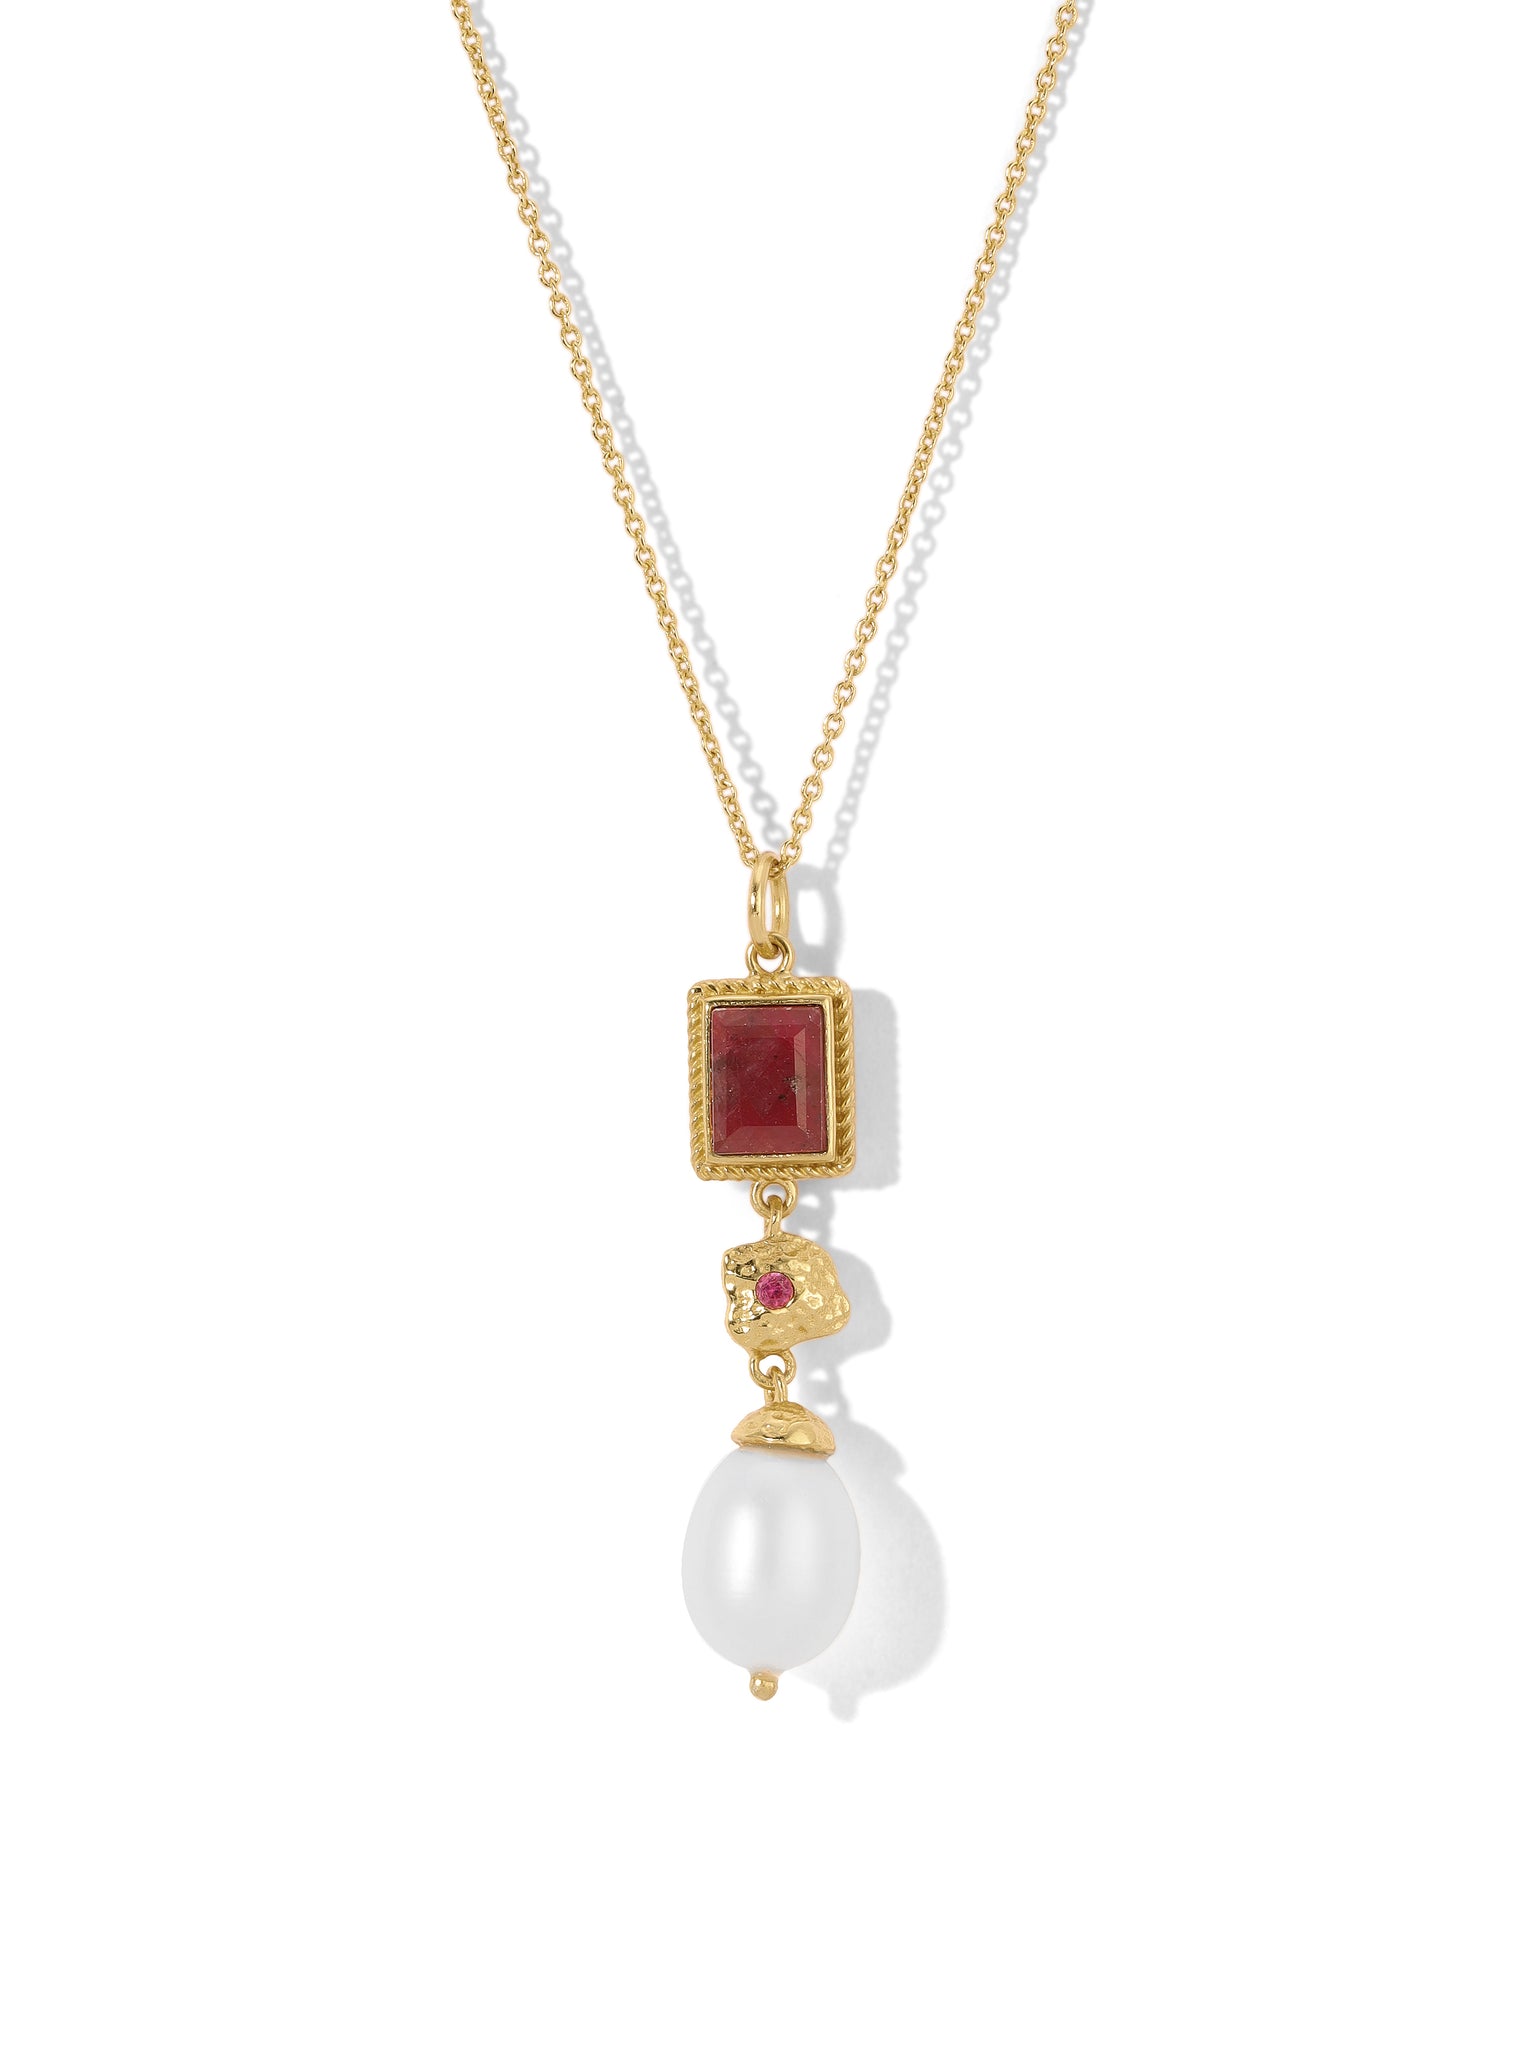 Vanessa Mooney - The Ensley Ruby Necklace - Necklaces - Ruby /